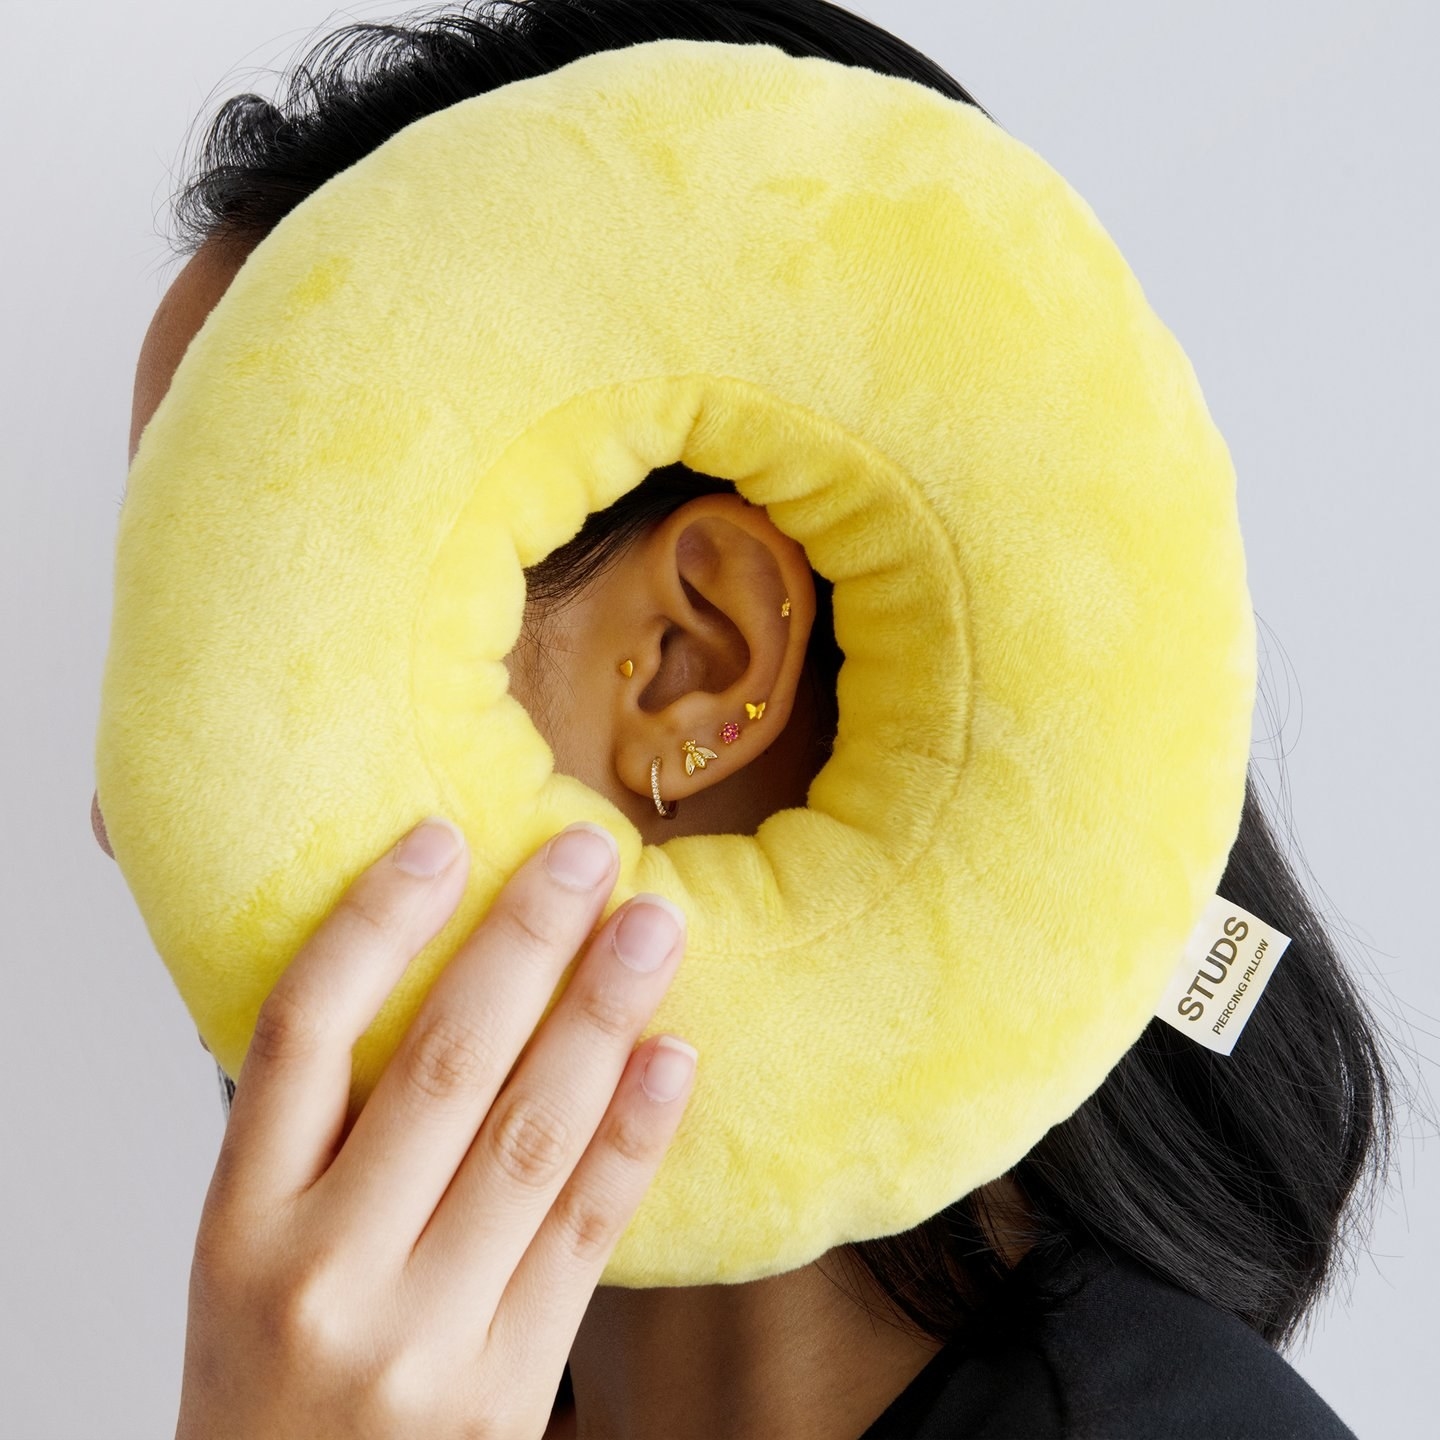 model holding a yellow circular pillow with a hole in the middle for your ear to reset